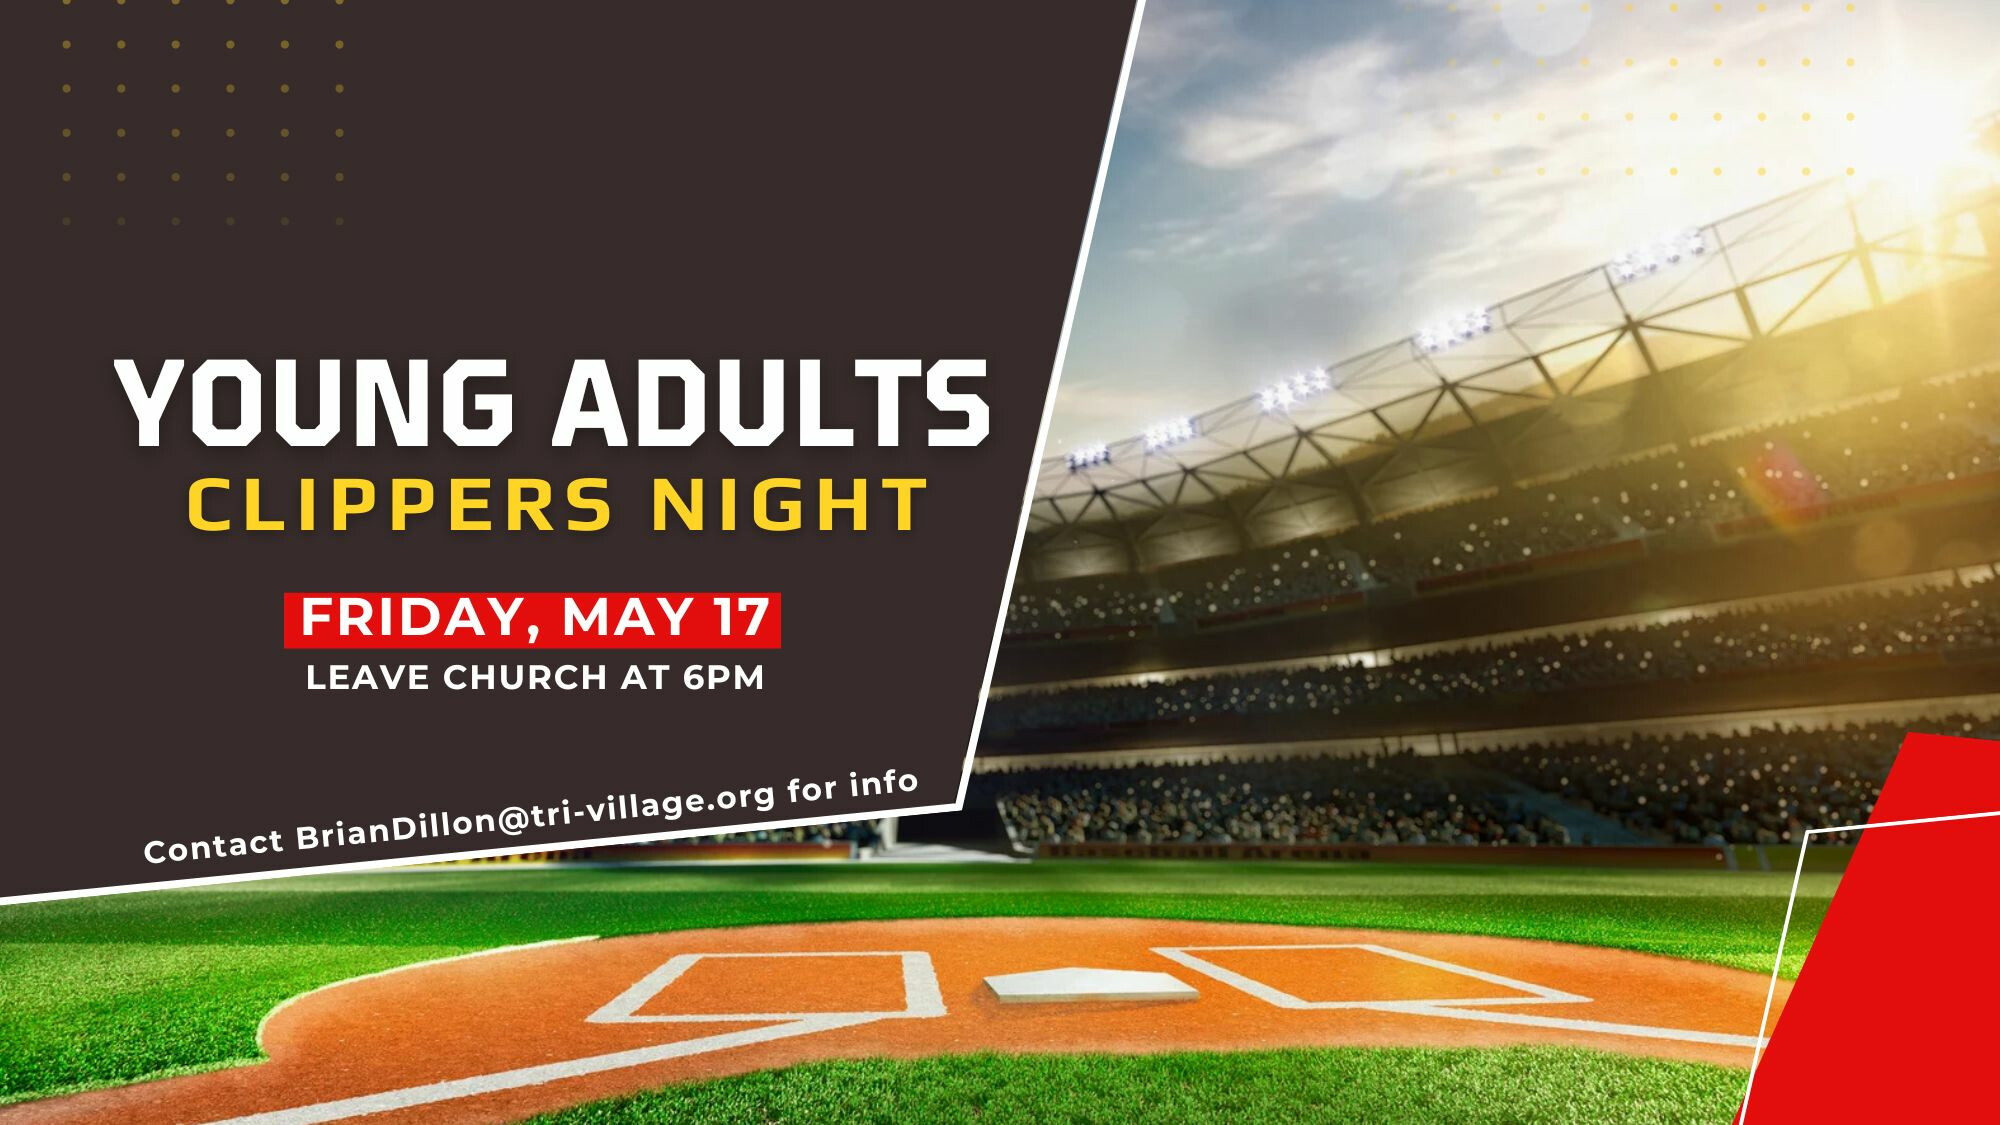 Young Adult Night Clippers Night